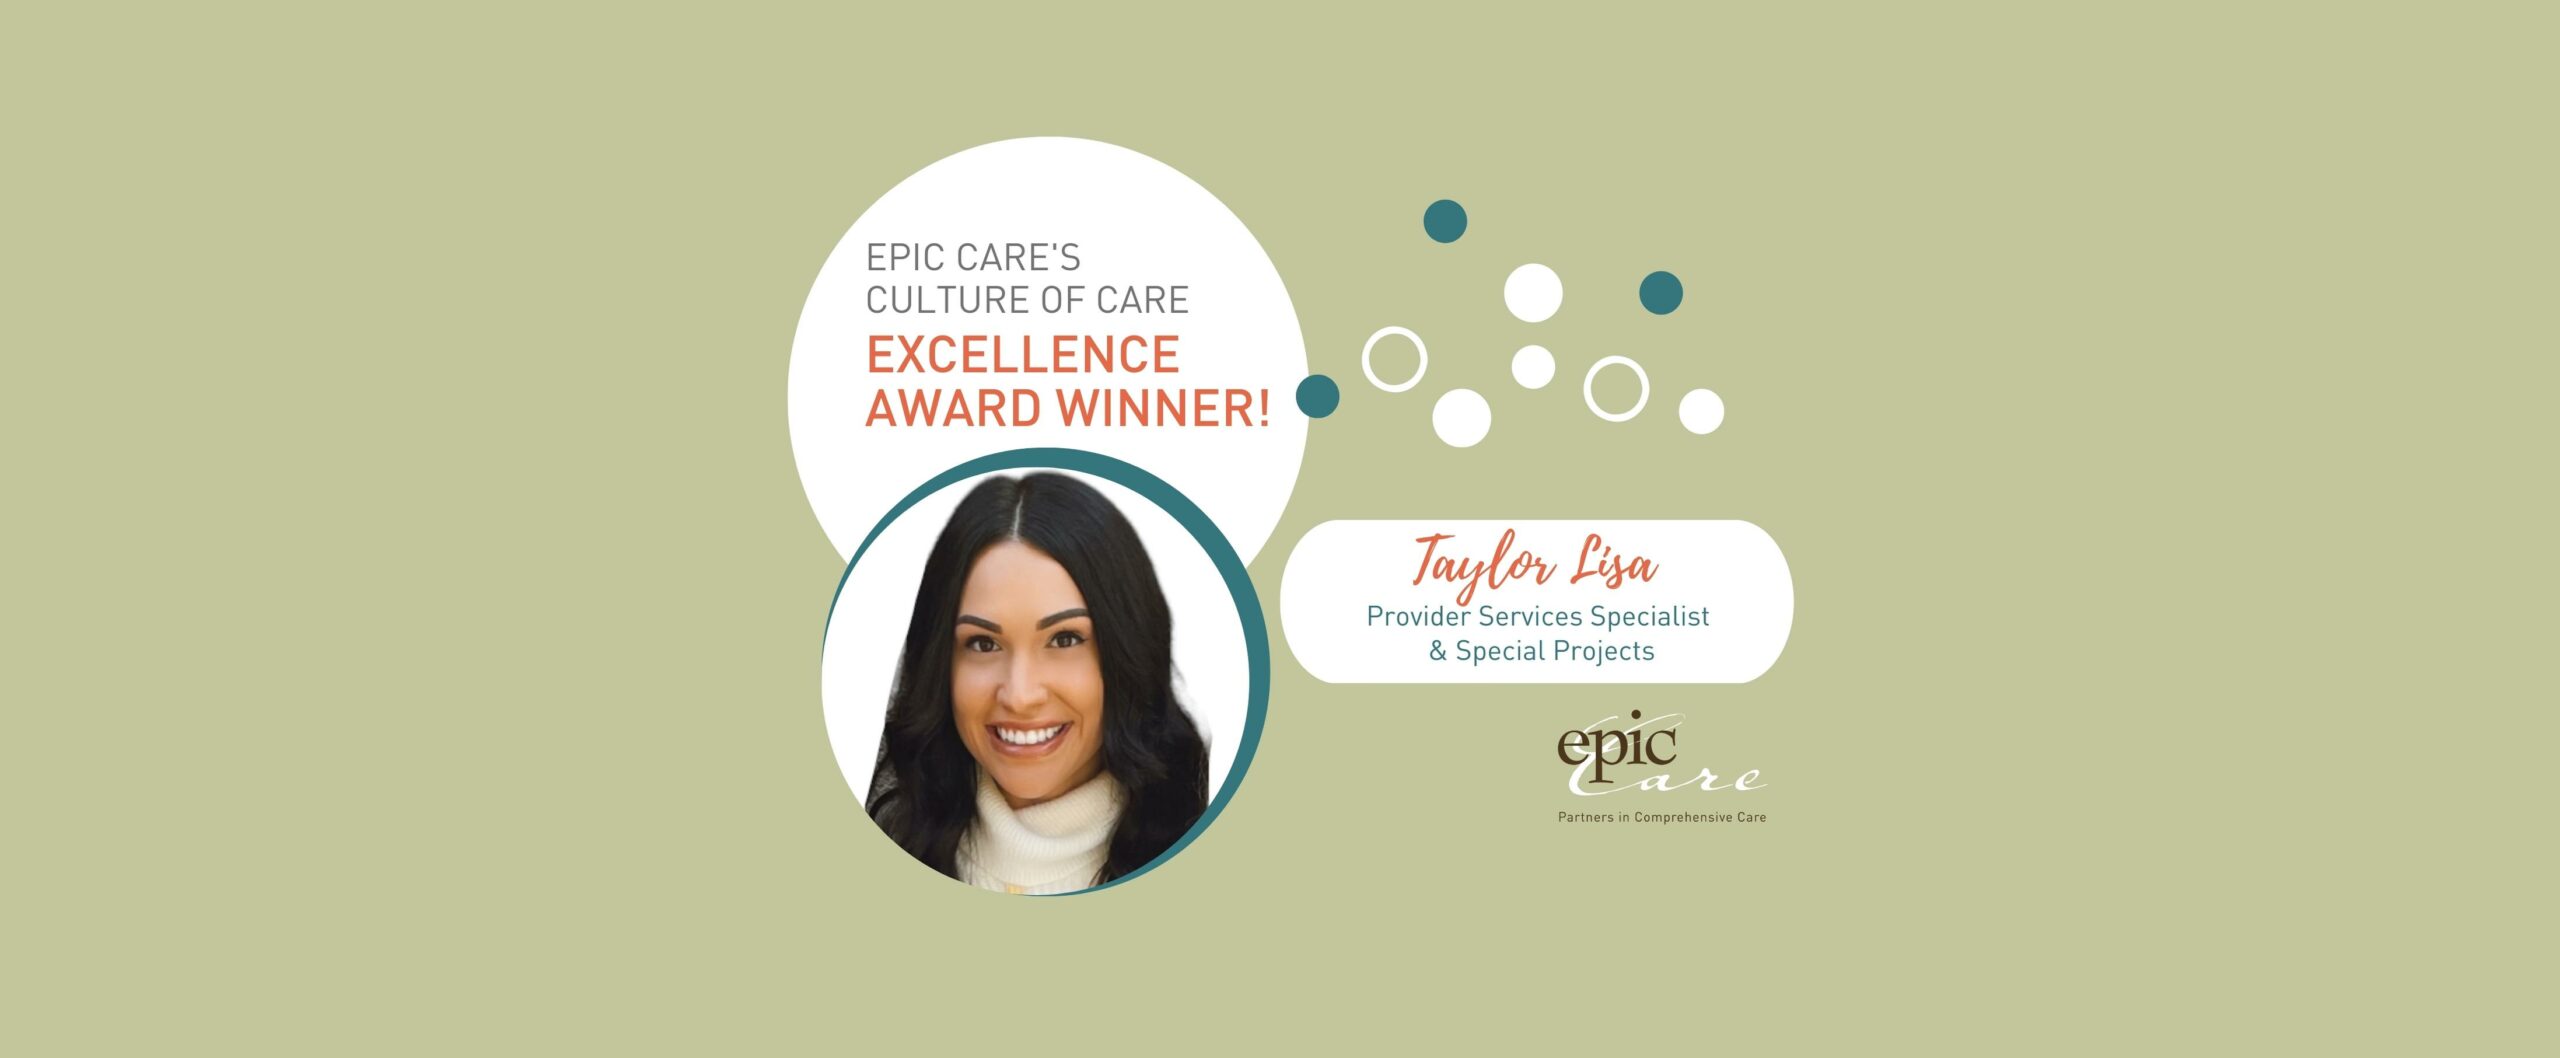 Epic Care’s Culture of CARE Excellence Award Winner! – Taylor Lisa